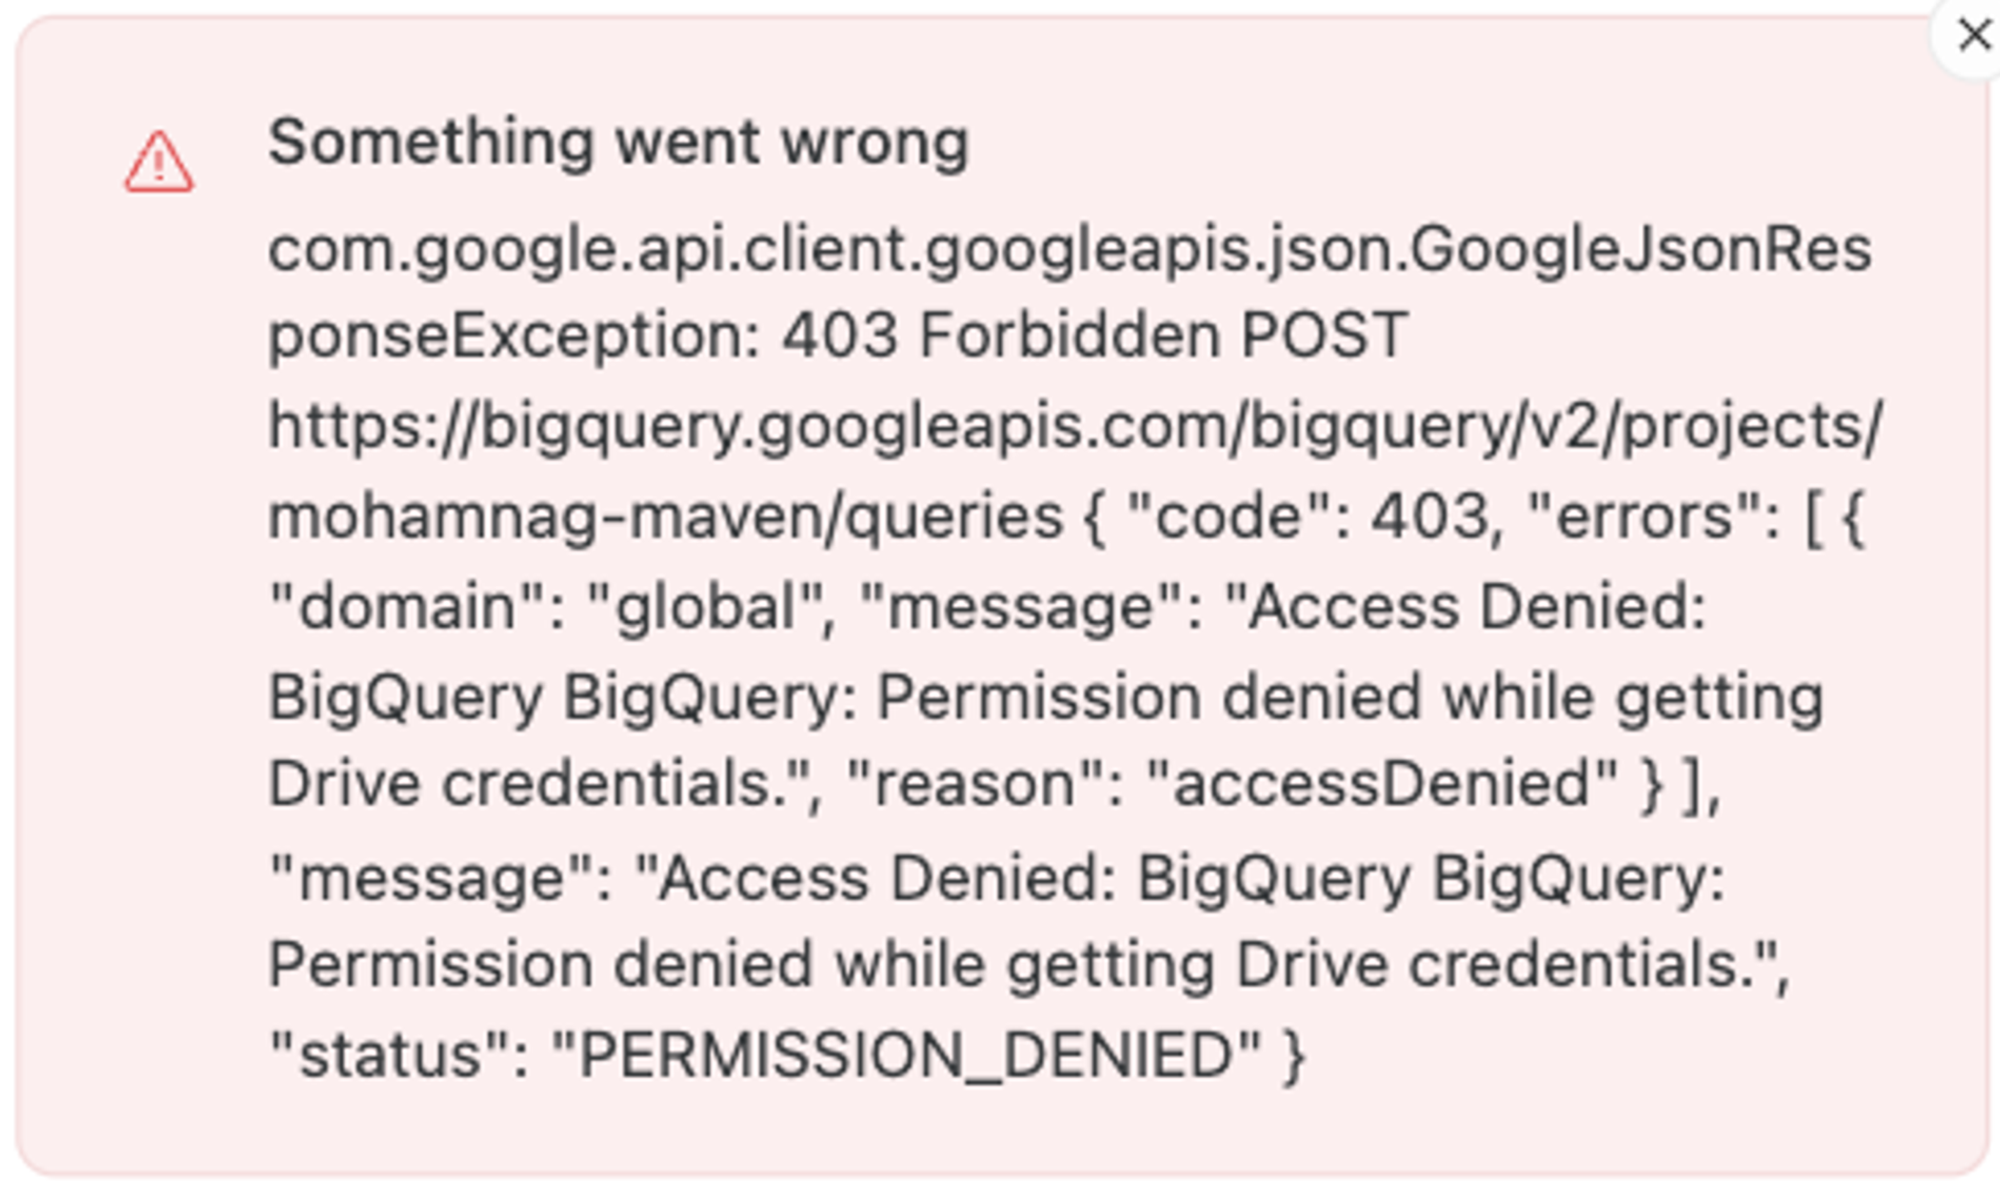 Important part of error in text: "Access Denied:
BigQuery BigQuery: Permission denied while getting Drive credentials.",